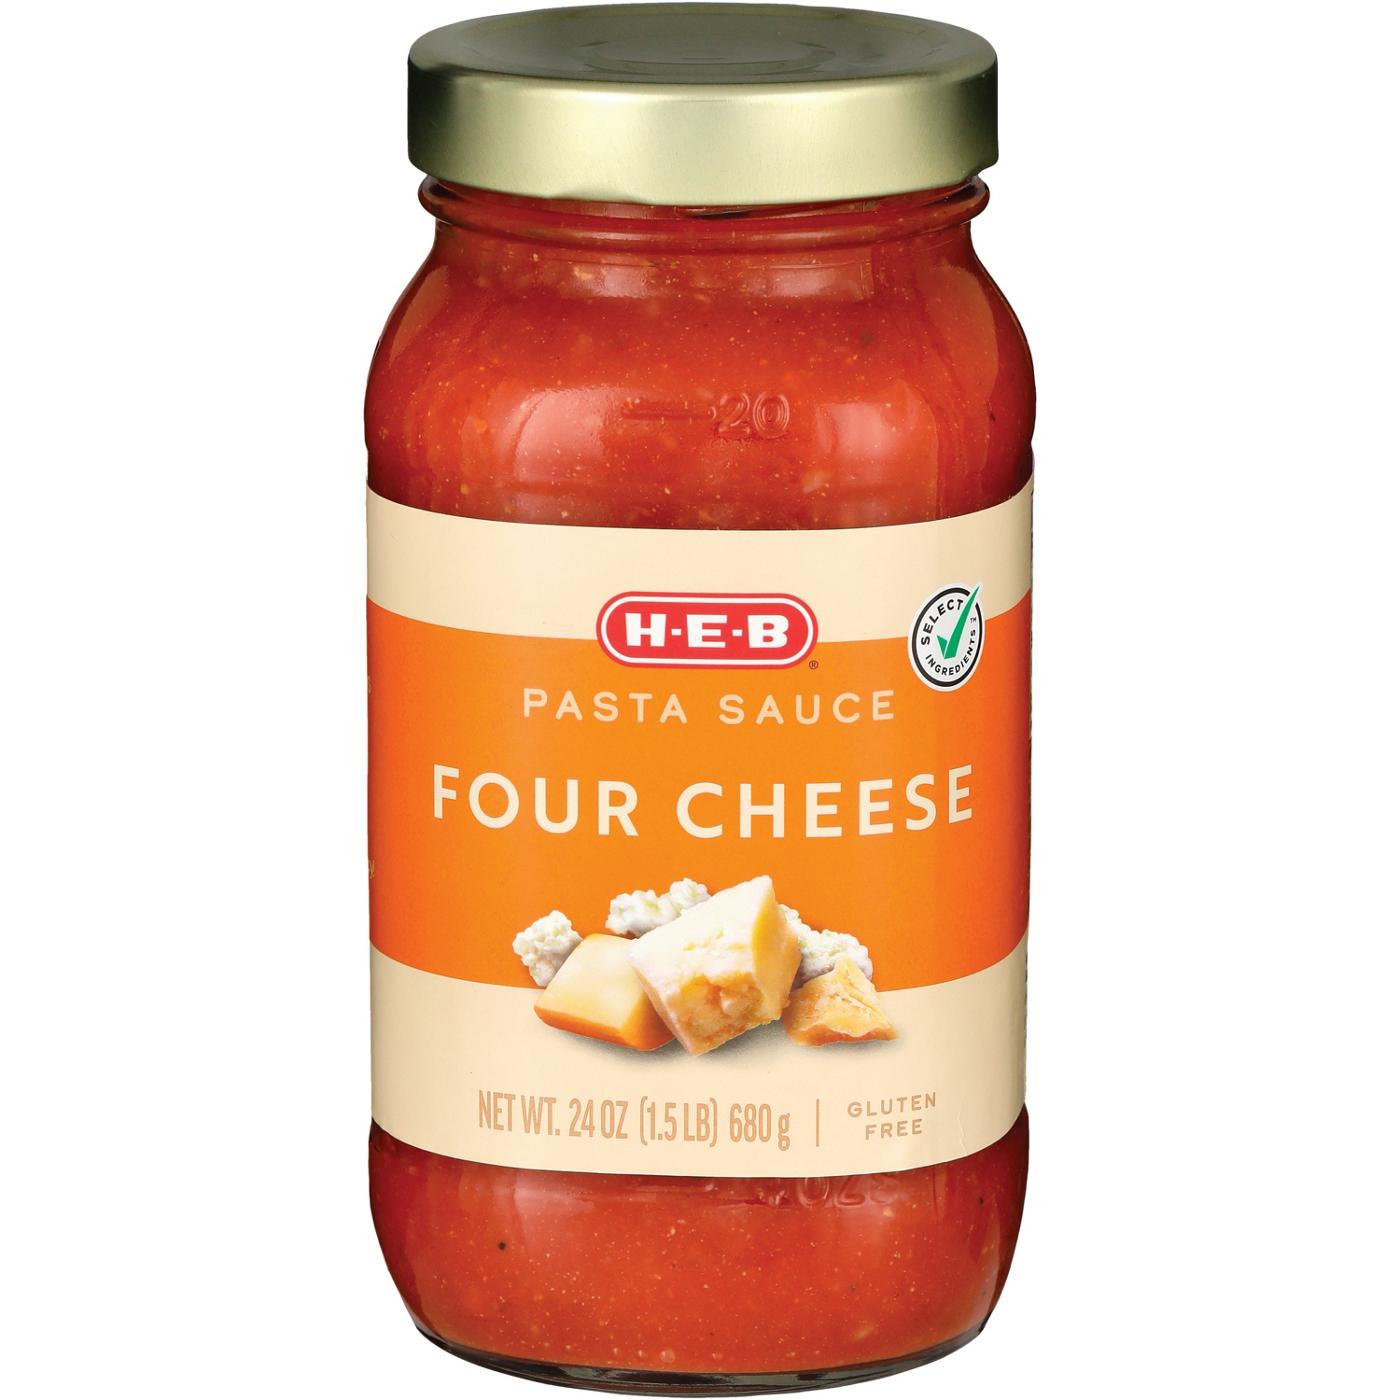 H-E-B Four Cheese Pasta Sauce; image 2 of 2